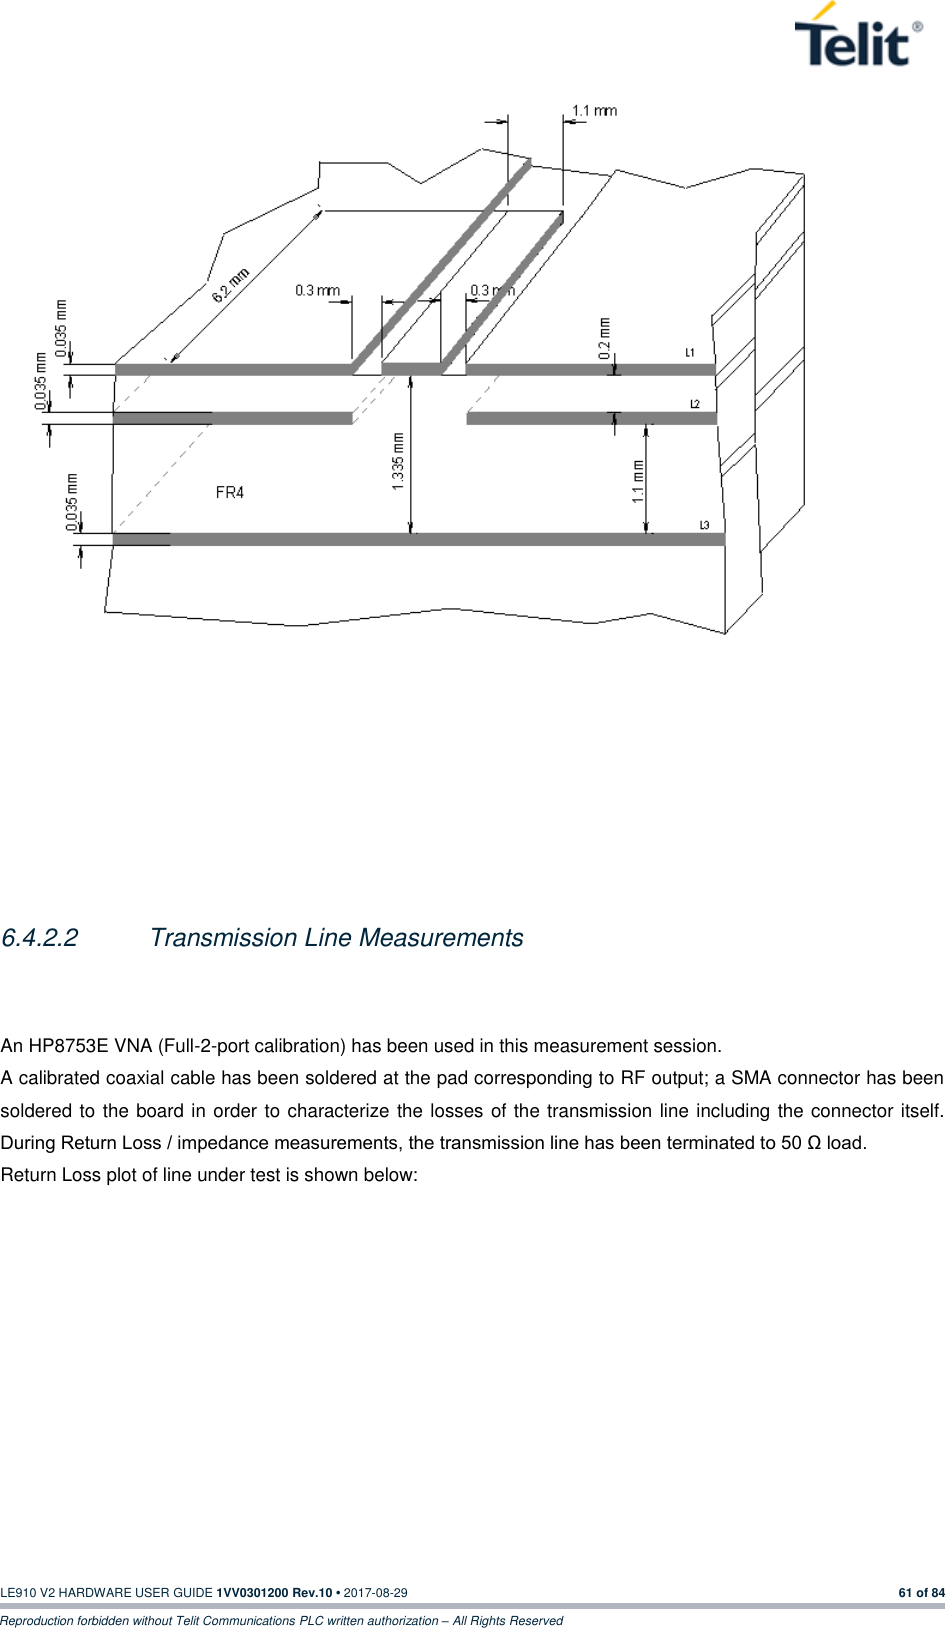   LE910 V2 HARDWARE USER GUIDE 1VV0301200 Rev.10 • 2017-08-29  61 of 84 Reproduction forbidden without Telit Communications PLC written authorization – All Rights Reserved                                 6.4.2.2  Transmission Line Measurements  An HP8753E VNA (Full-2-port calibration) has been used in this measurement session.  A calibrated coaxial cable has been soldered at the pad corresponding to RF output; a SMA connector has been soldered to the board in order to characterize the losses of the transmission line including the connector itself. During Return Loss / impedance measurements, the transmission line has been terminated to 50 Ω load. Return Loss plot of line under test is shown below: 